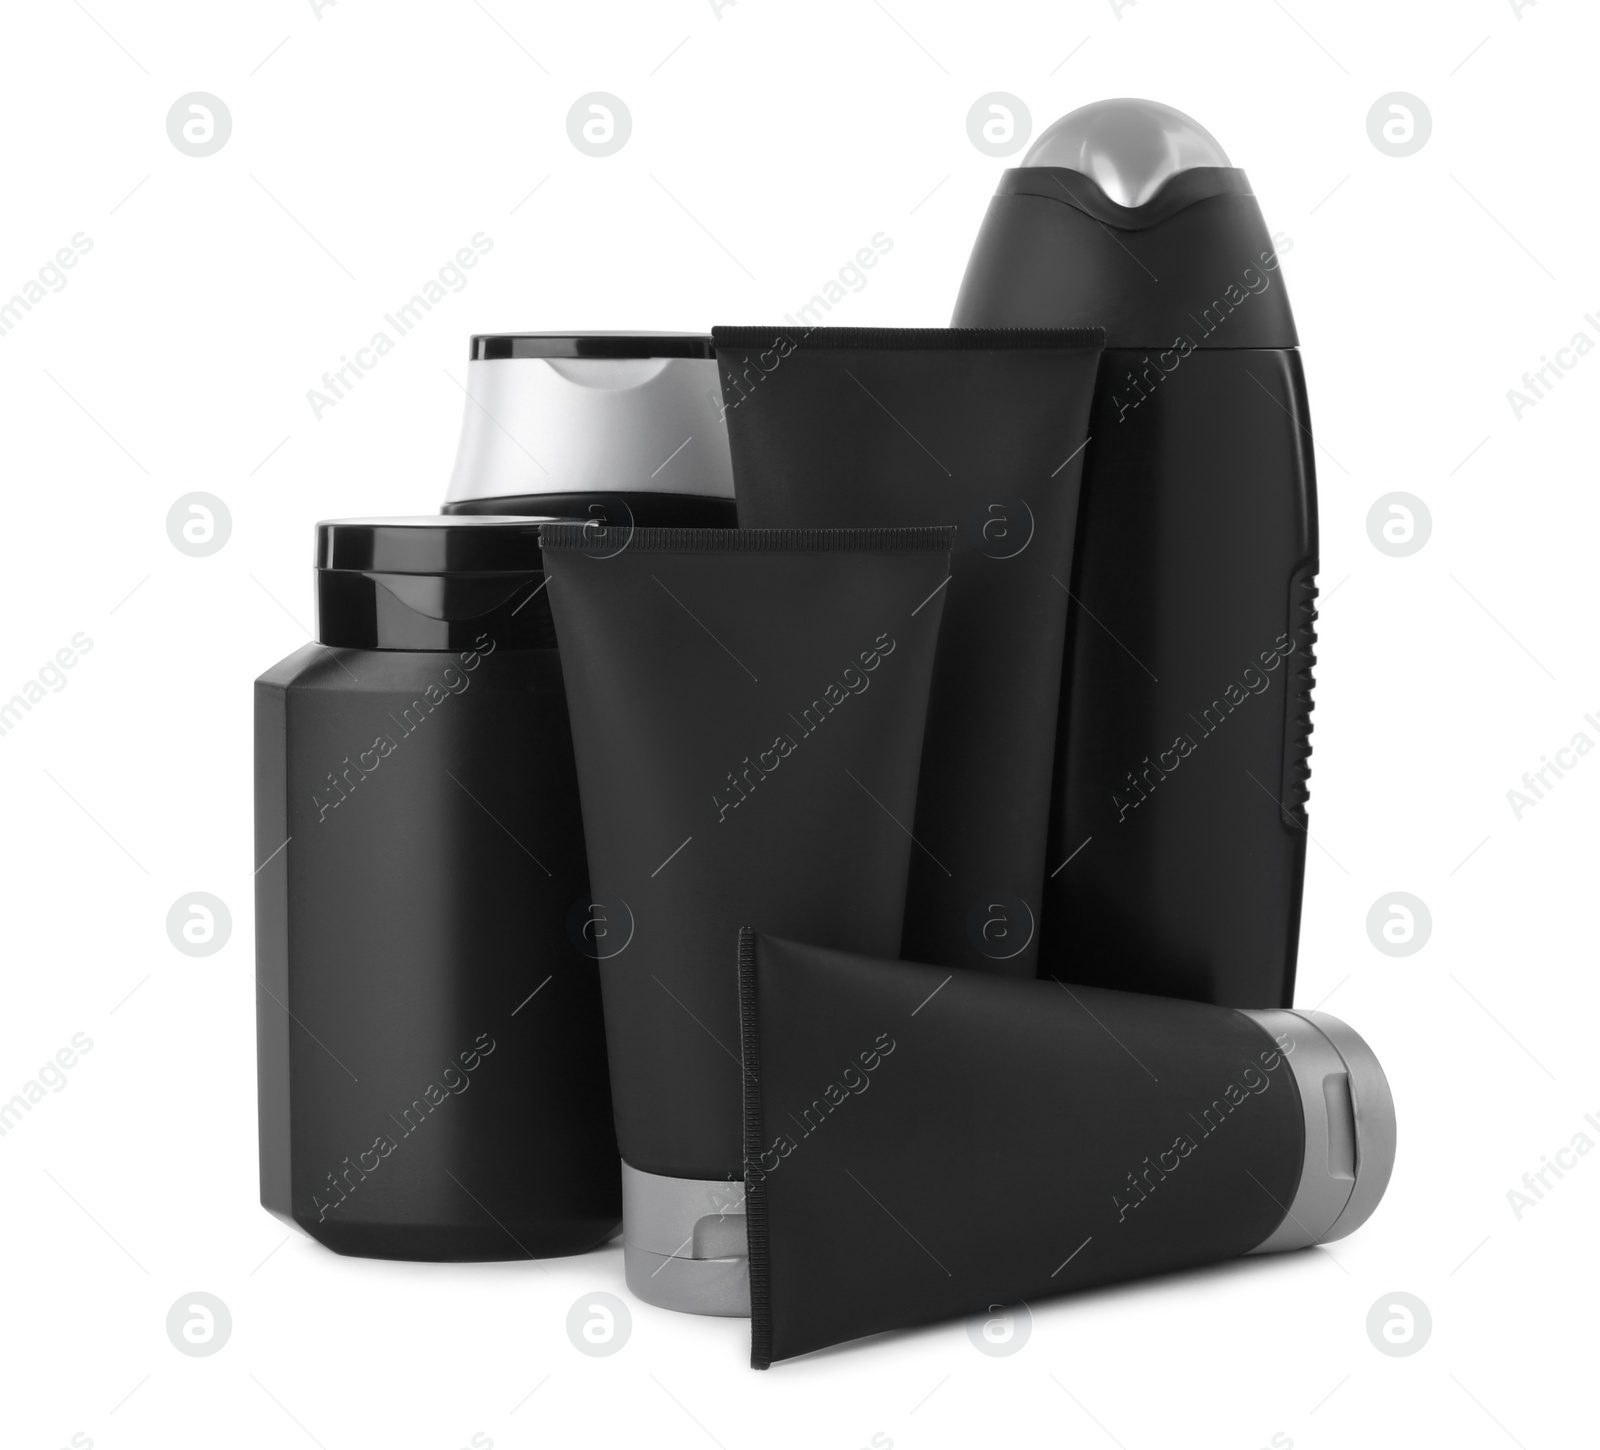 Photo of Set of men's cosmetic products on white background